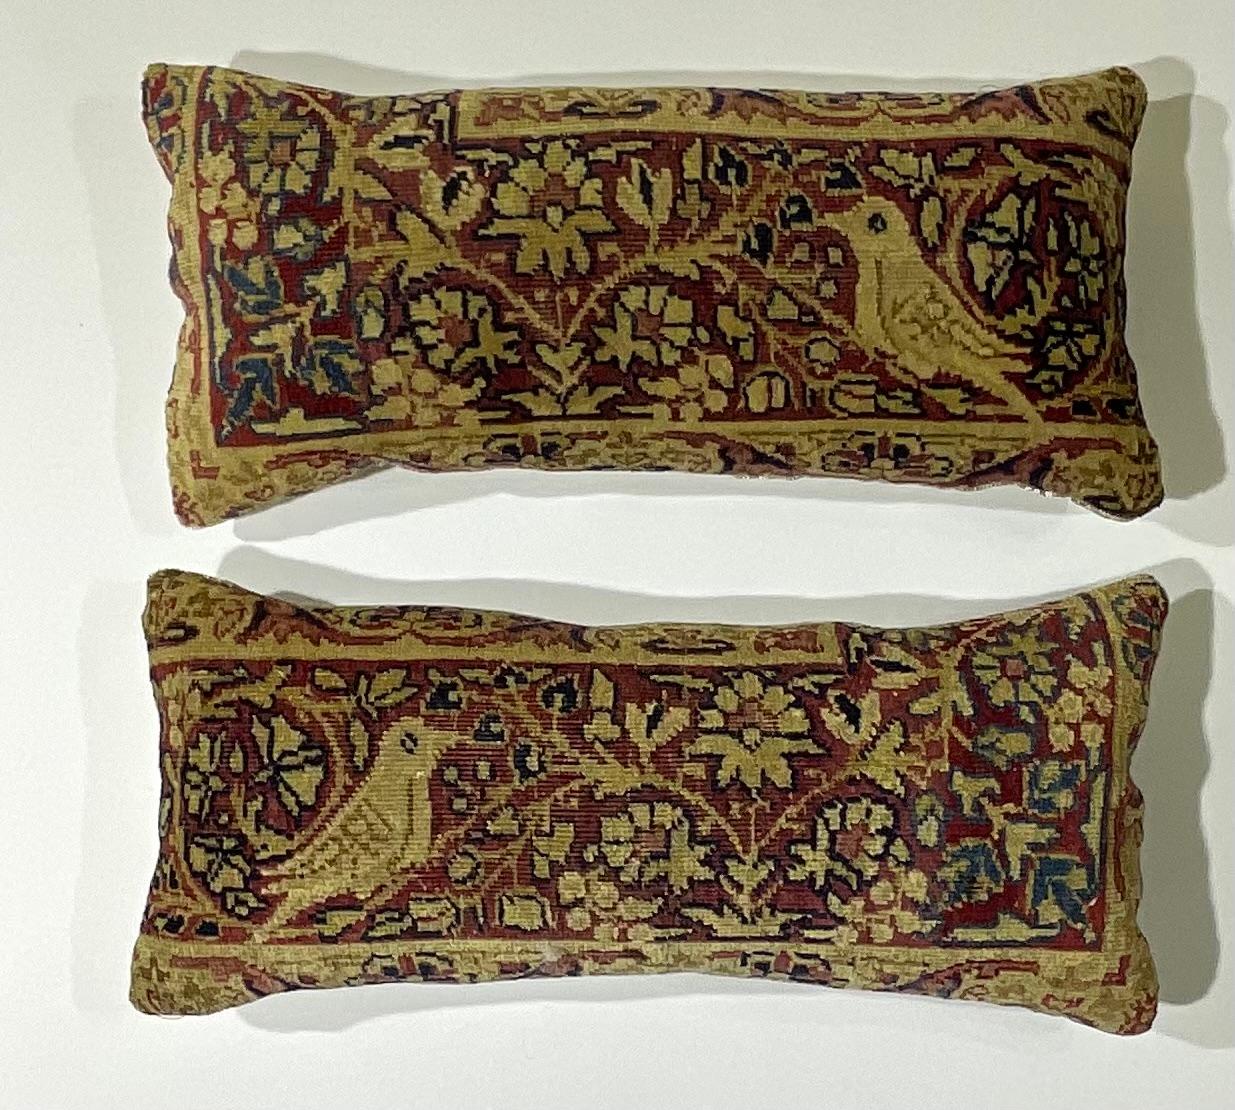 Beautiful pillows made of hand woven 19th century antique Lavar Carmon rug fragment, of two birds surrounded with vines and flowers. Fine fresh insert, quality linen backing.
Fragment is hand wash before become pillow.
Great addition to any room